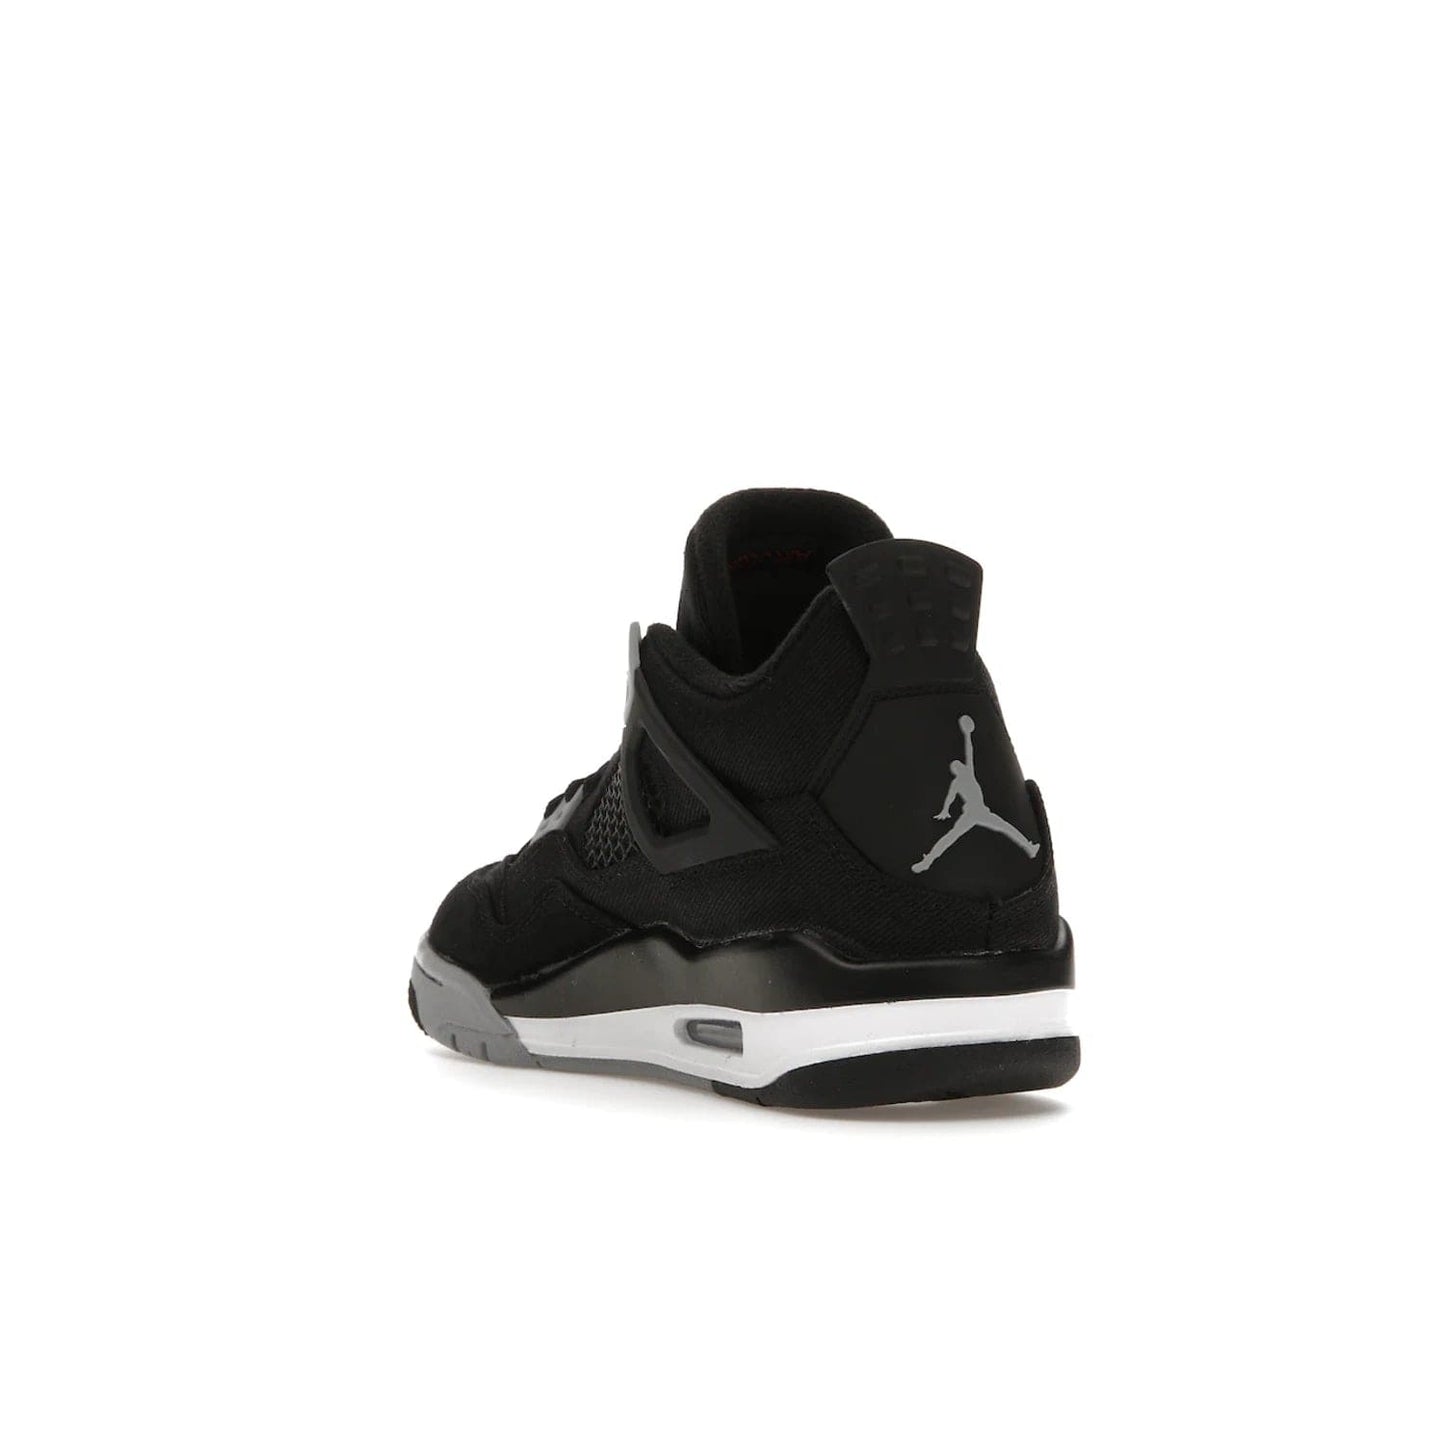 Jordan 4 Retro Black Canvas (GS) - Image 25 - Only at www.BallersClubKickz.com - Premium Air Jordan 4 Retro Black Canvas in grade-schooler's catalog. Featuring black suede canvas upper, grey molding, accents in red, white midsole, woven Jumpman tag, & visible AIR cushioning. Releasing Oct. 1, 2022.